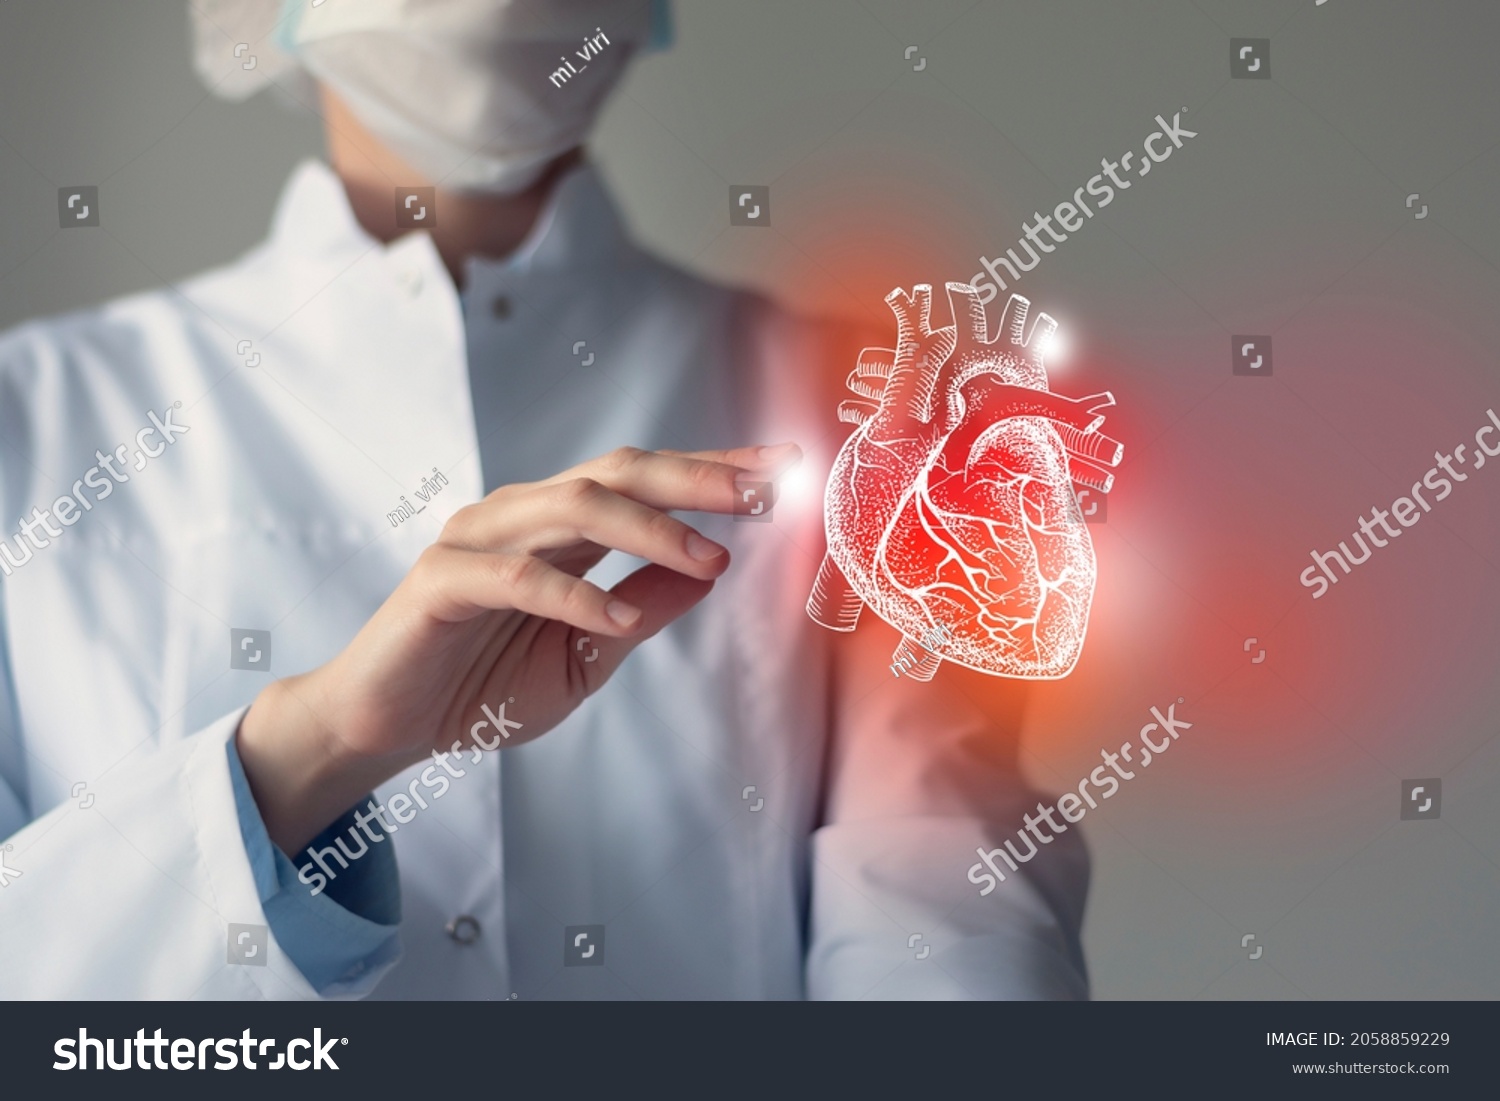 Female doctor touchstone virtual Heart in hand. Blurred photo, handrawn human organ, highlighted red as symbol of disease. Healthcare hospital service concept stock photo #2058859229